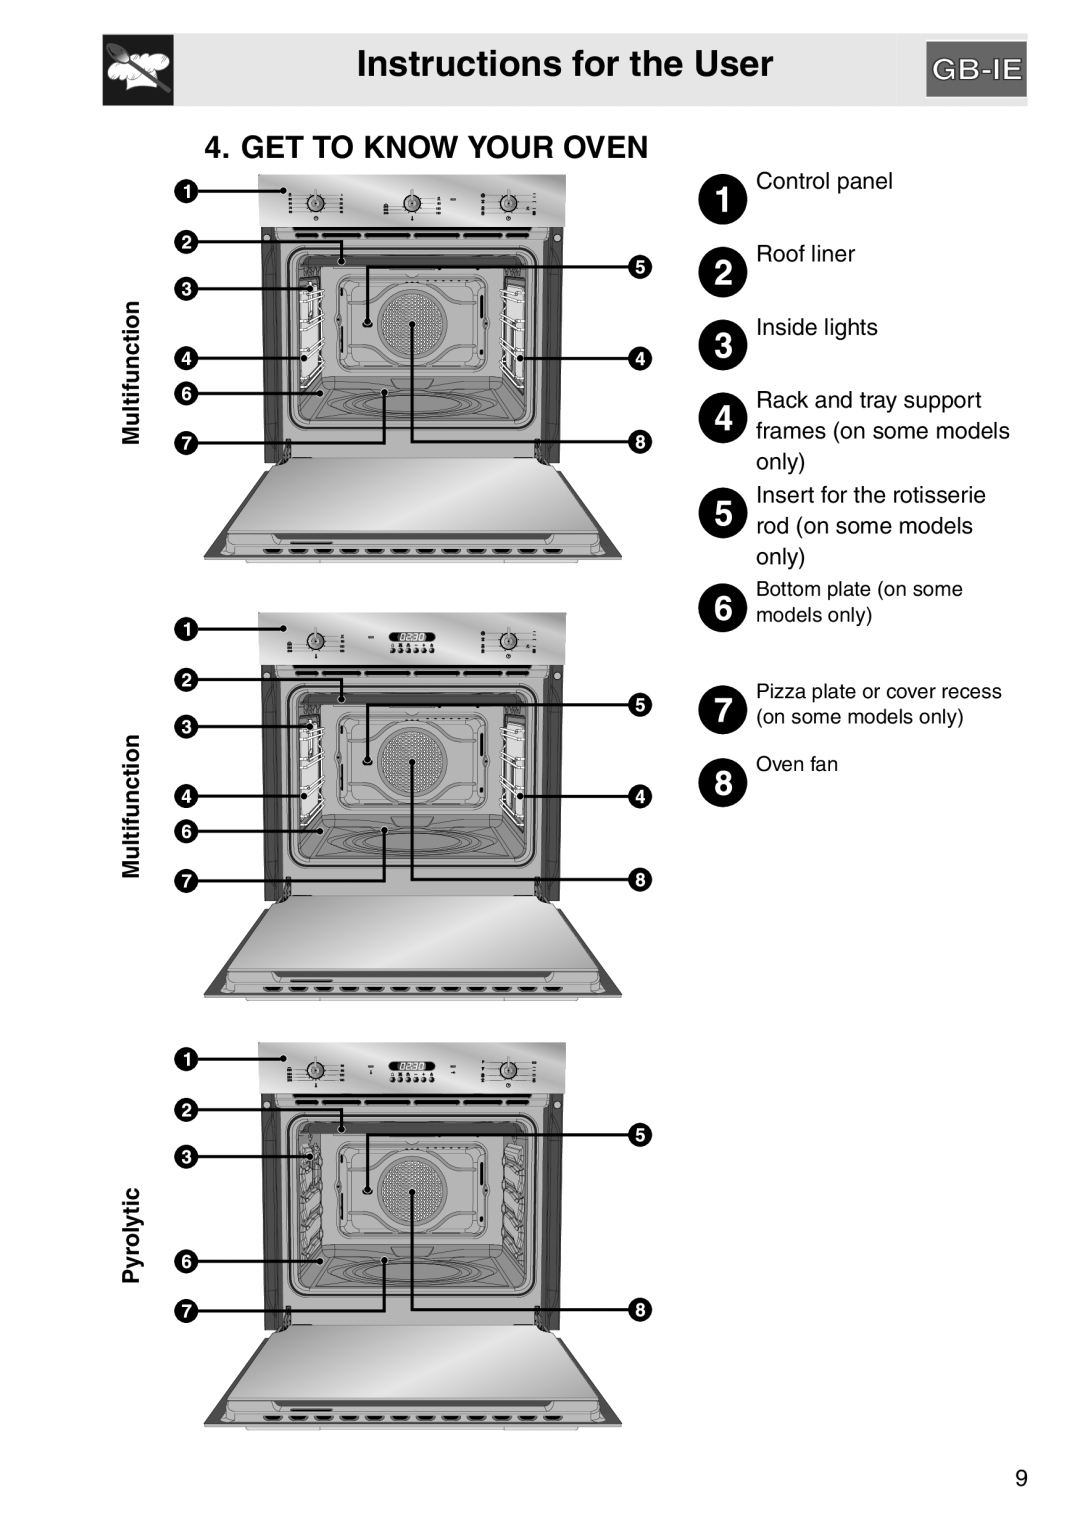 Smeg SA561X-9 Instructions for the User, Get To Know Your Oven, Multifunction Multifunction Pyrolytic 